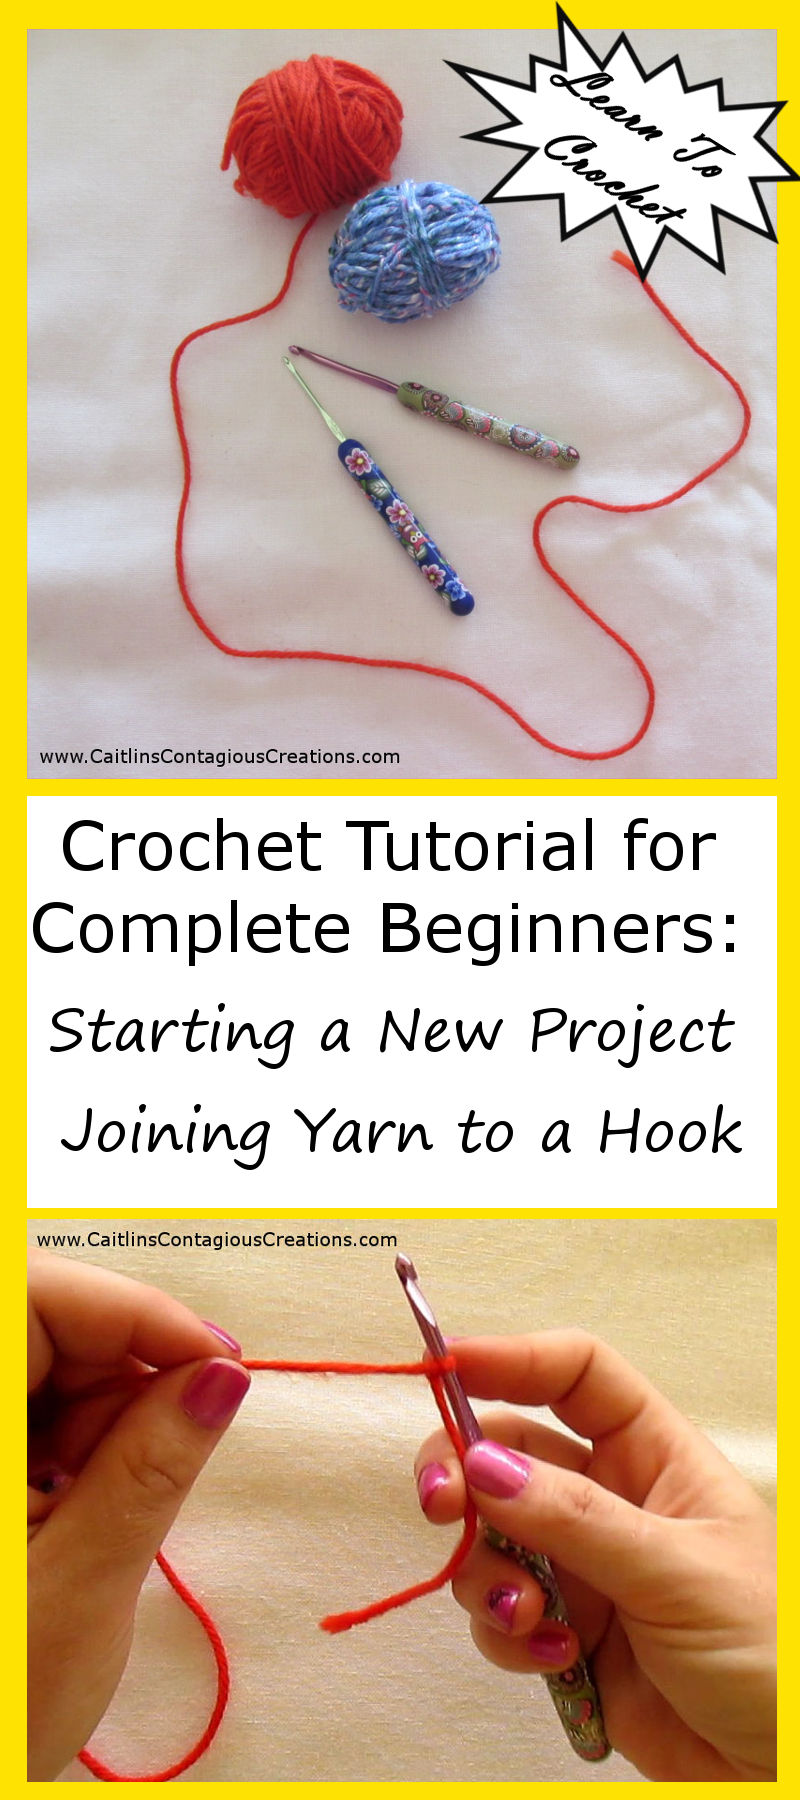 Learn To Crochet! A tutorial for complete beginners. Learn to attach yarn to a crochet hook to start a new crochet project. A step by step guide with photos from Caitlin's Contagious Creations!